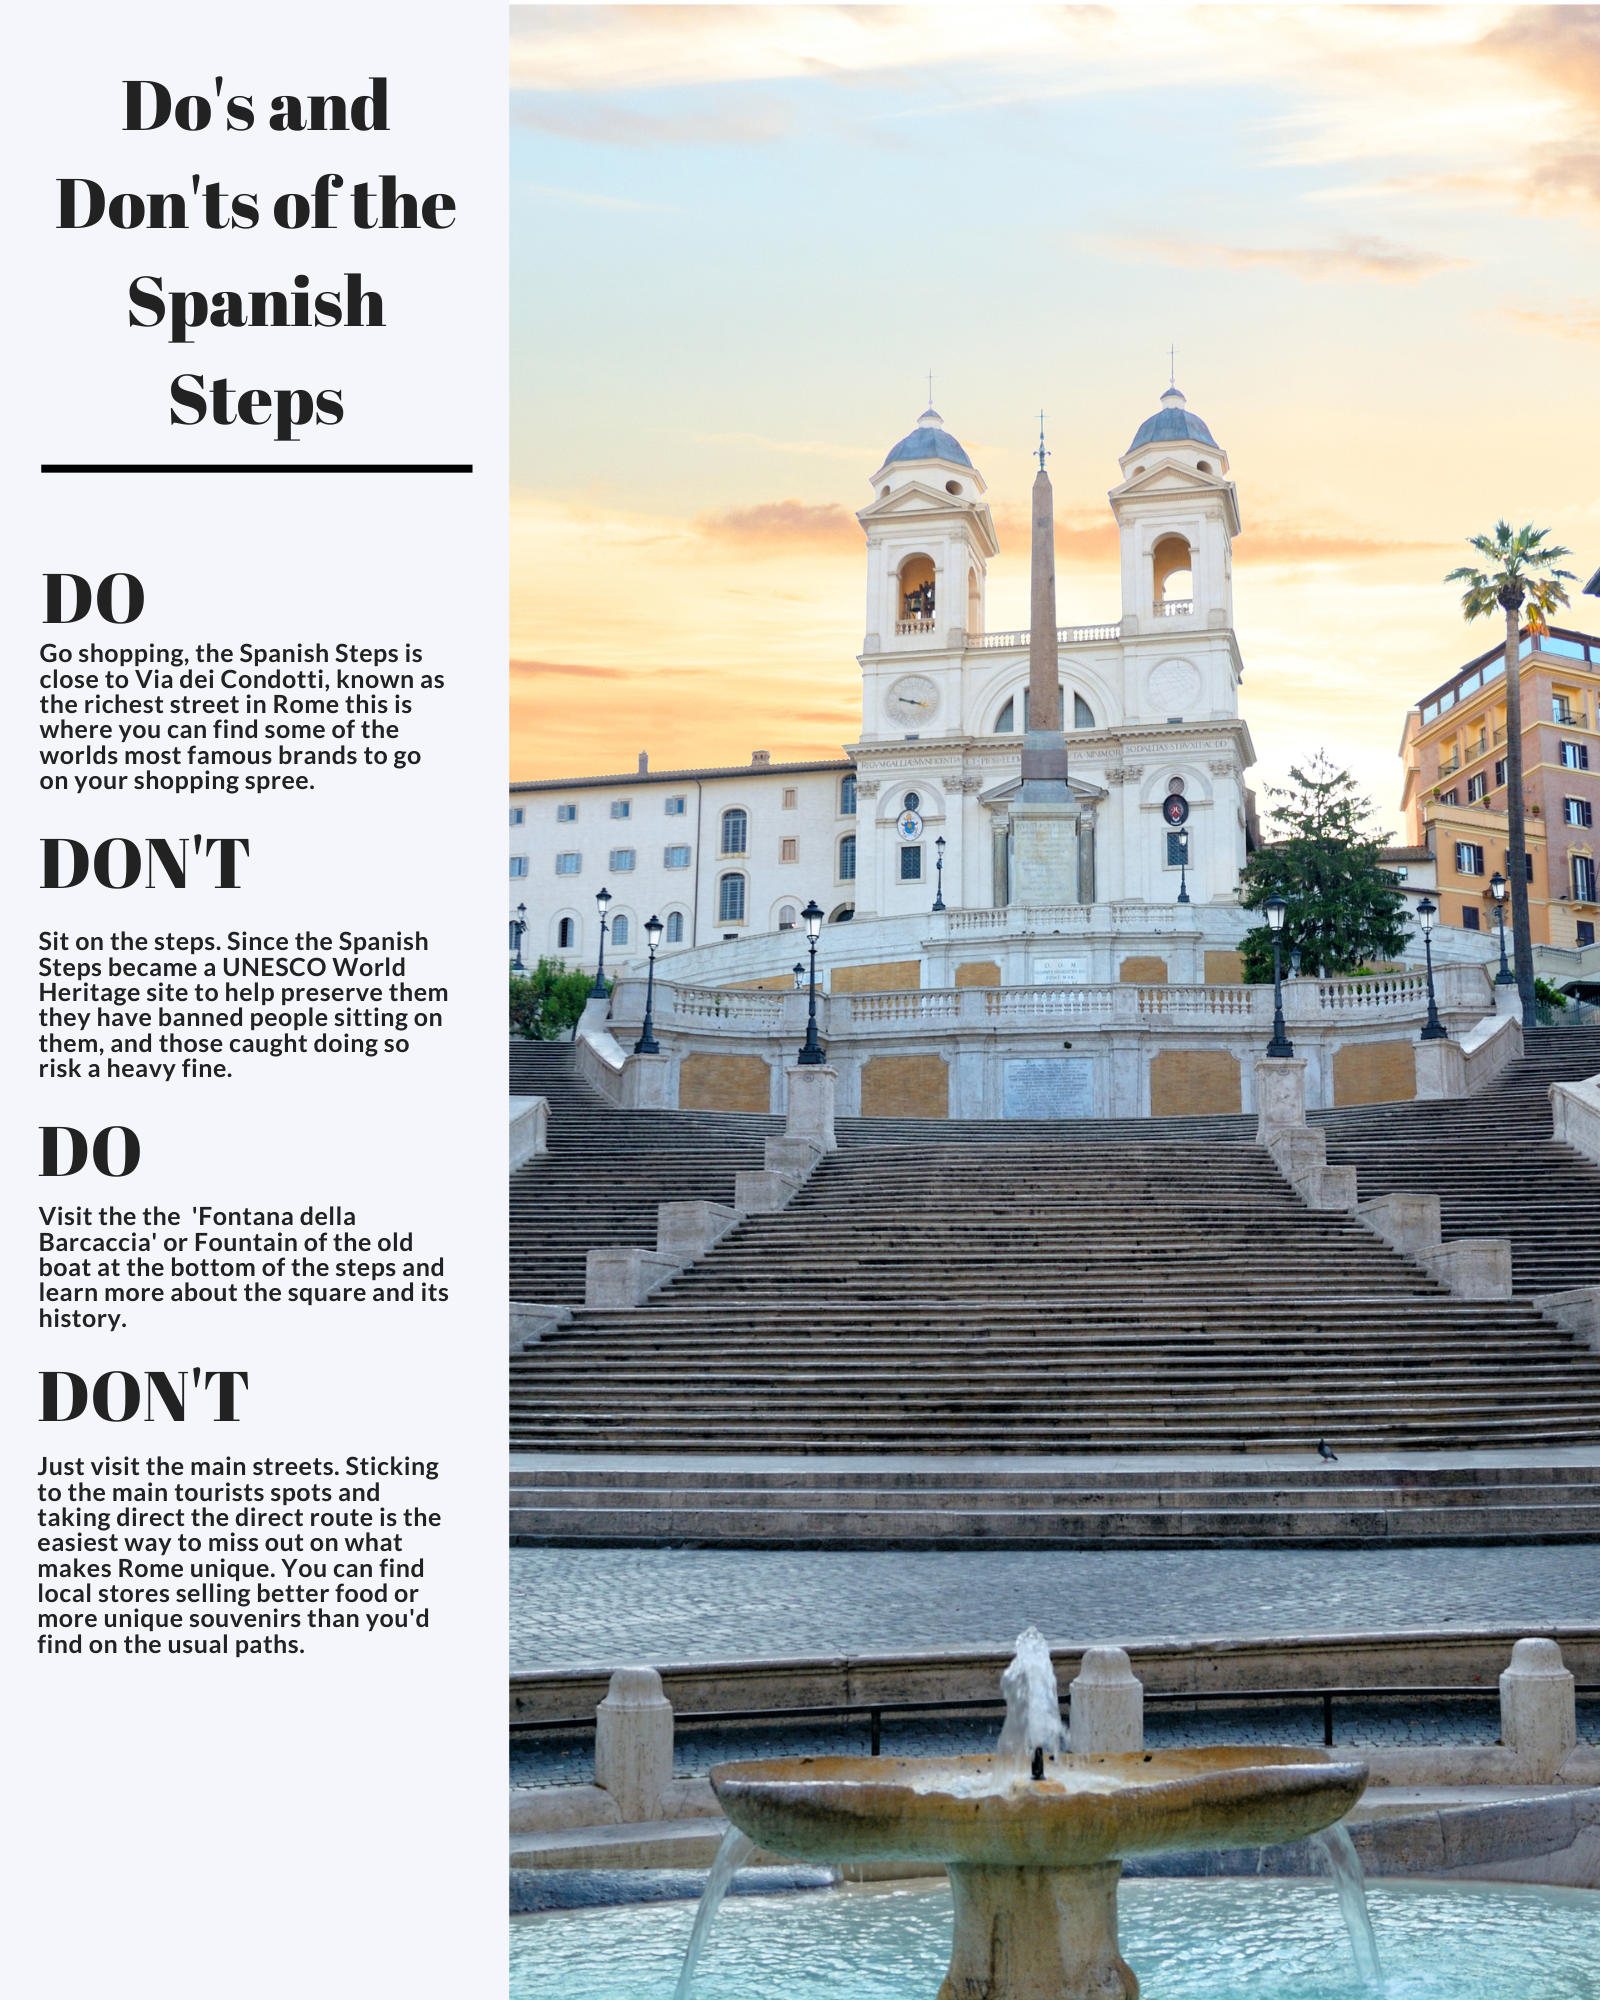 Do's and Don'ts - Tips and advice for the Spanish Steps